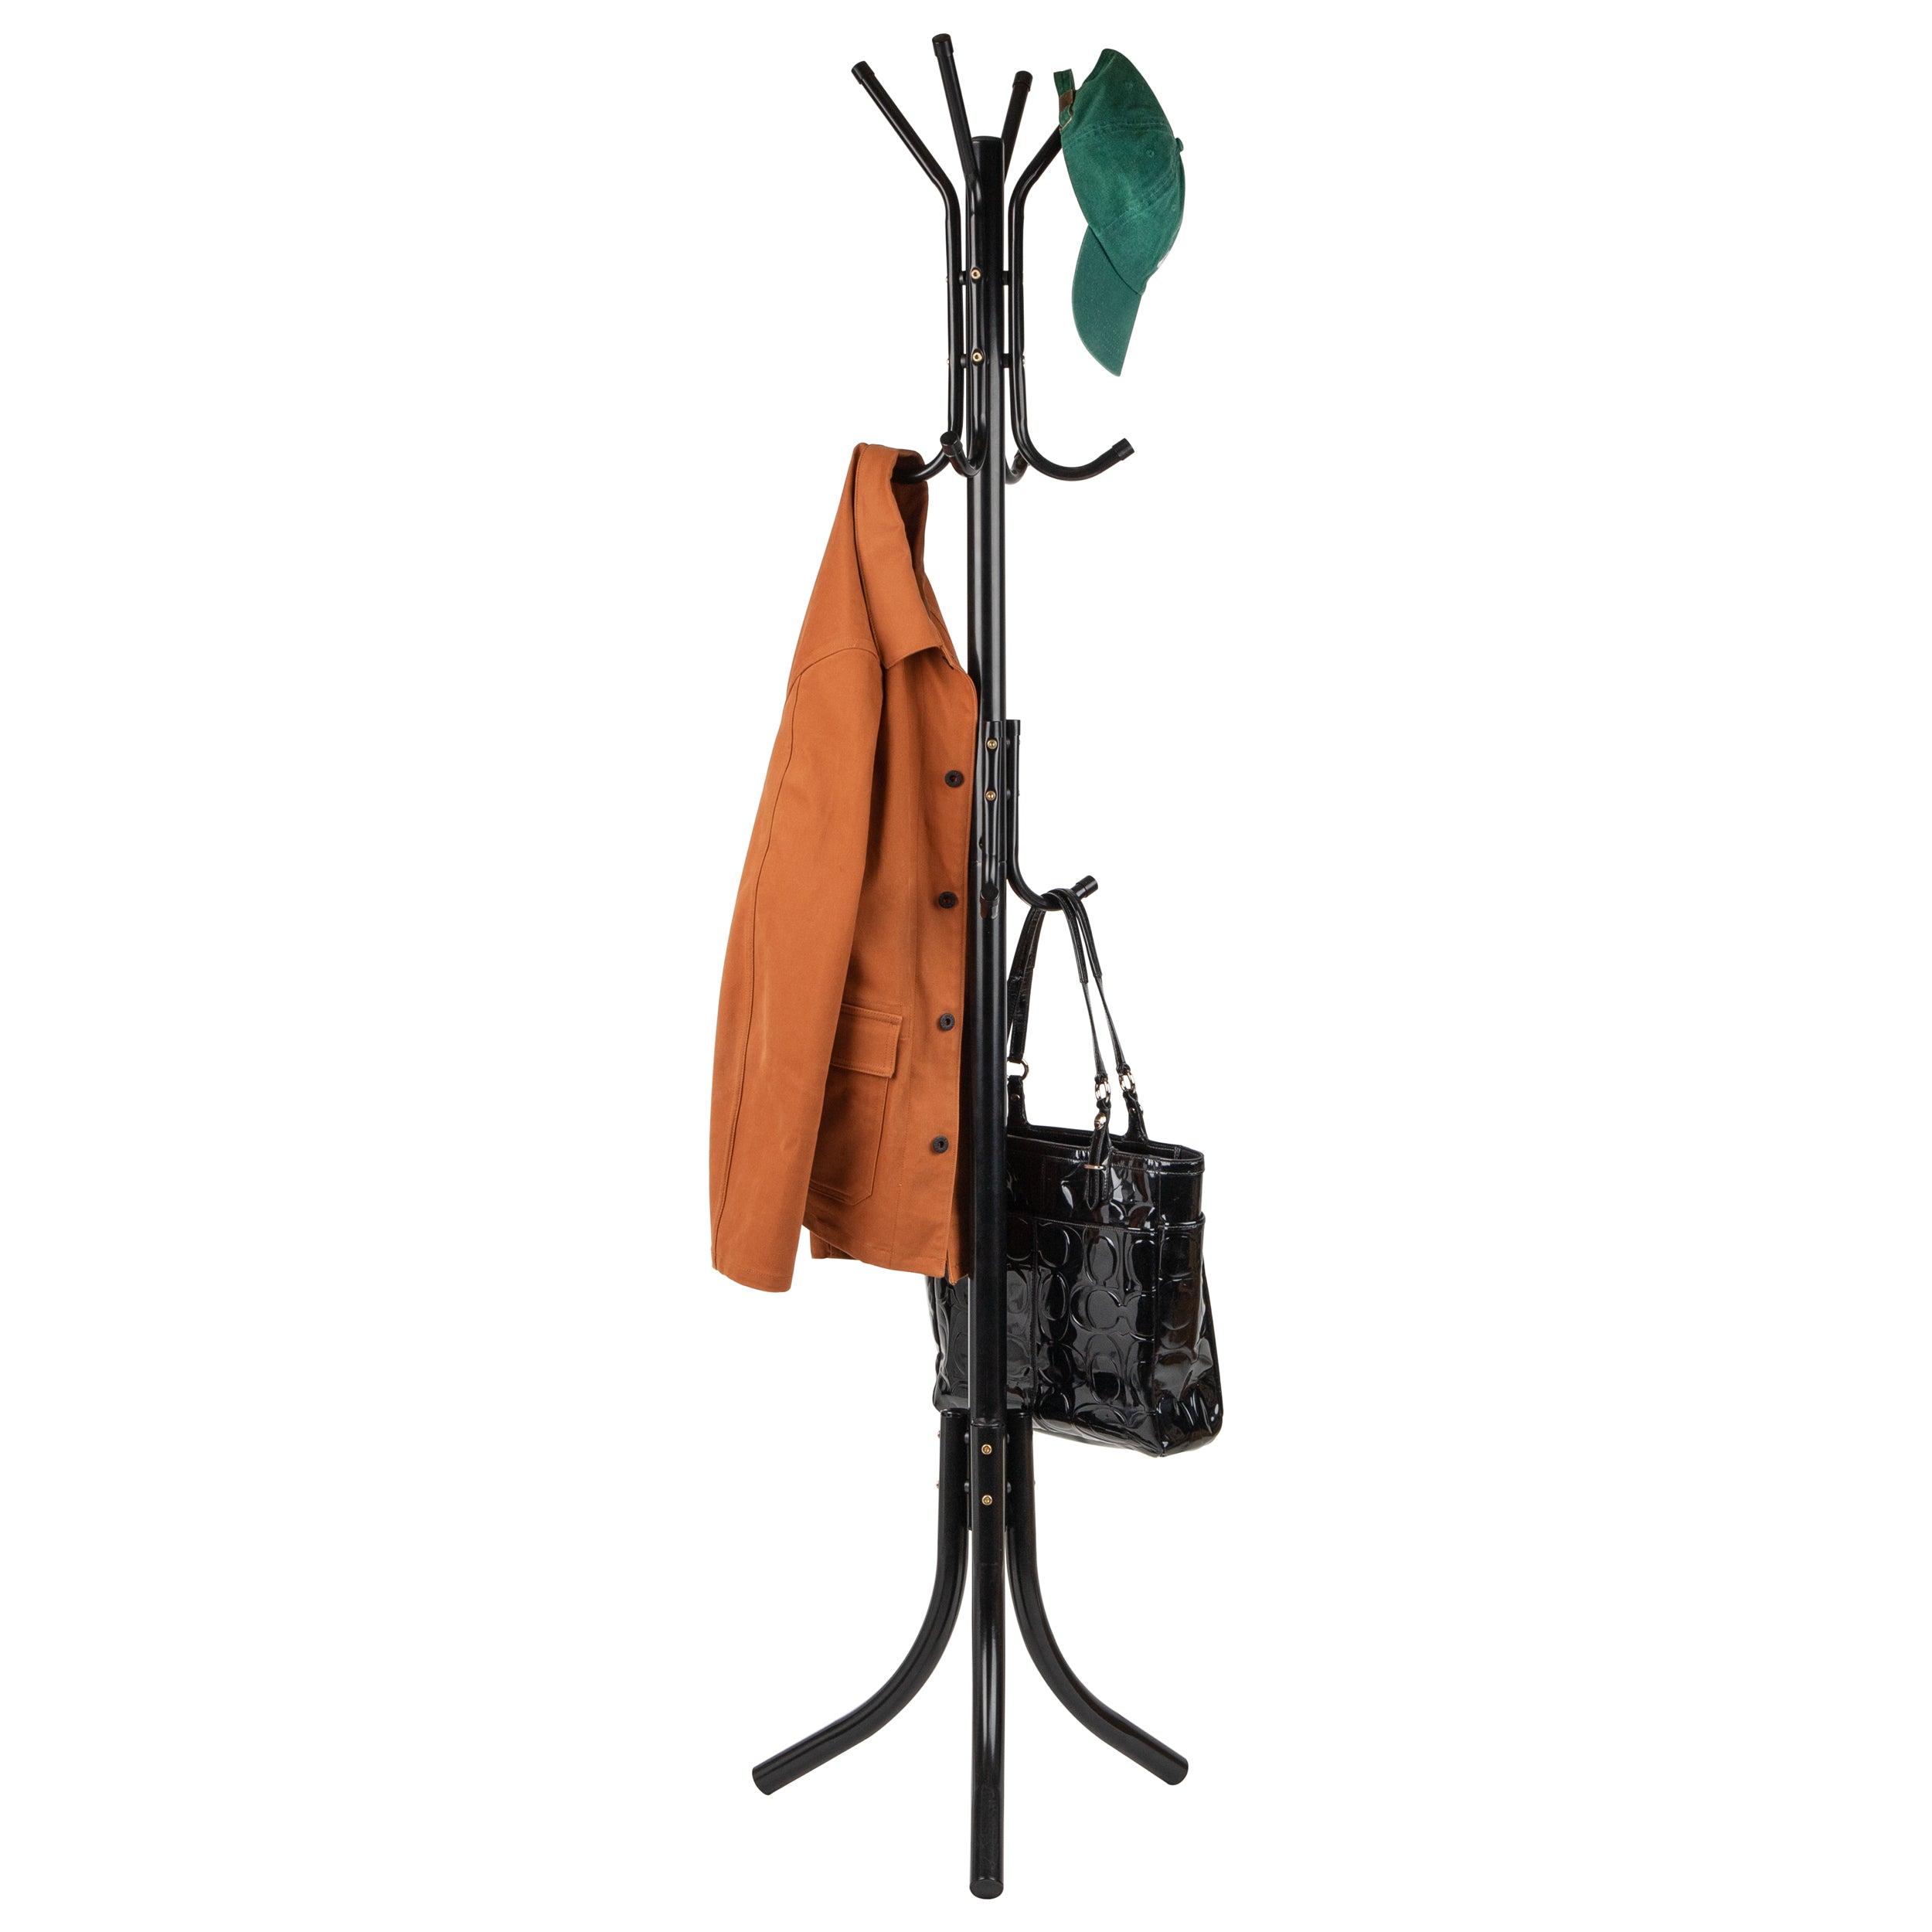 Ash & Roh® Coat Rack Freestanding, Modern Standing Coat Stand Hanging Up 8  Hook for Jacket, Hat, Cloth, Purse, Hand-Bag - Hall Tree Entry Way,  Farmhouse (Walnut) : Amazon.in: Home & Kitchen